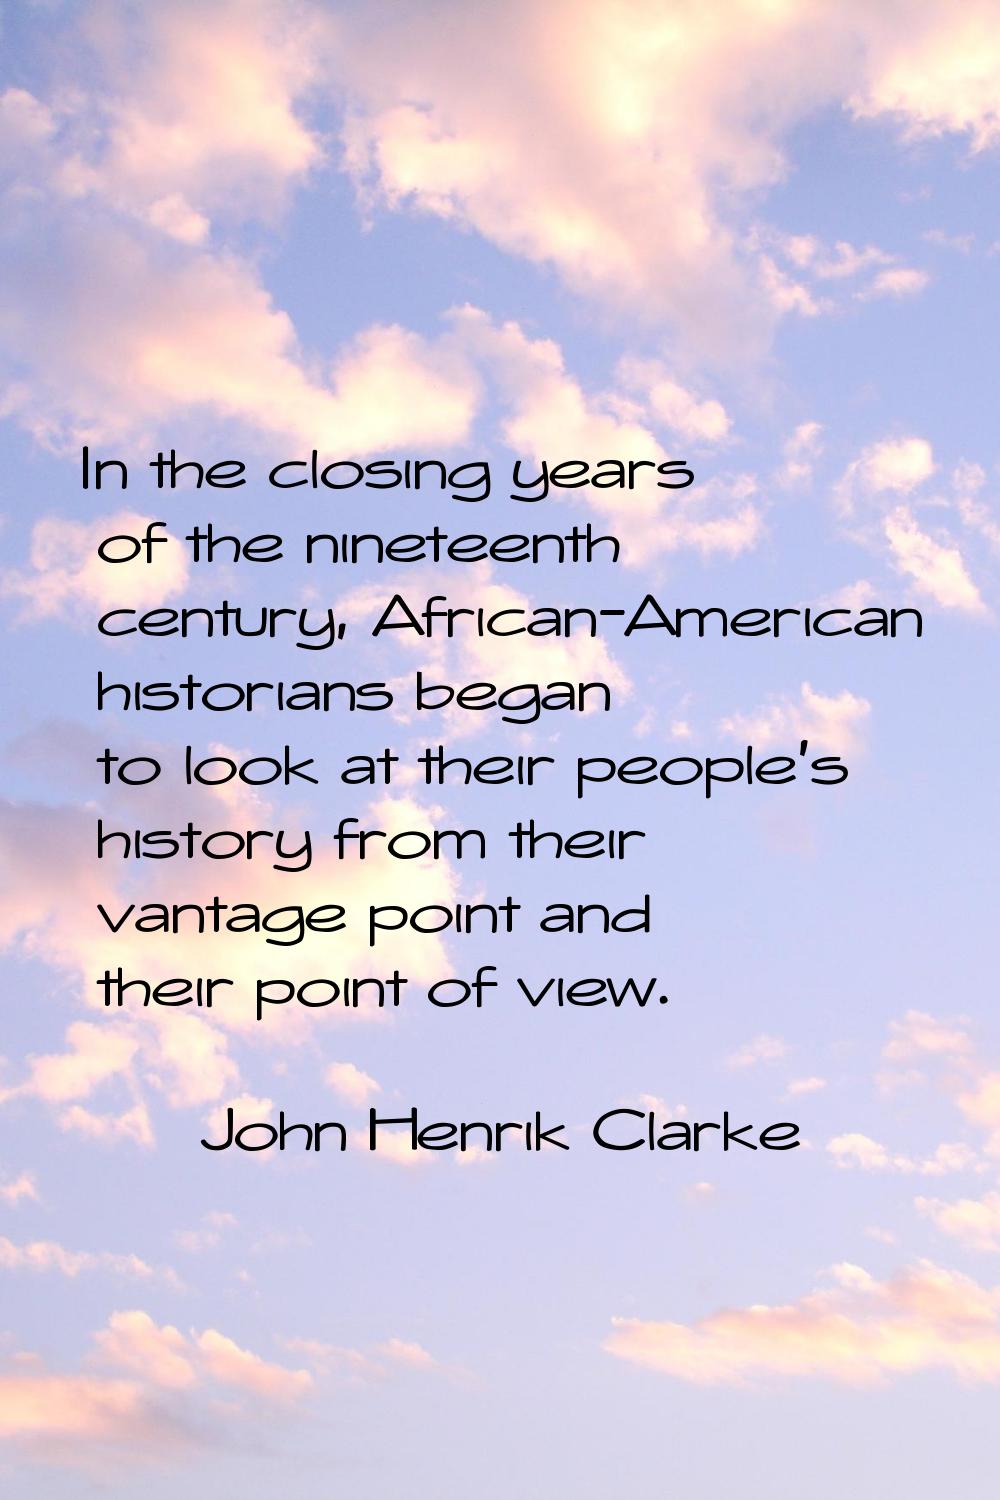 In the closing years of the nineteenth century, African-American historians began to look at their 